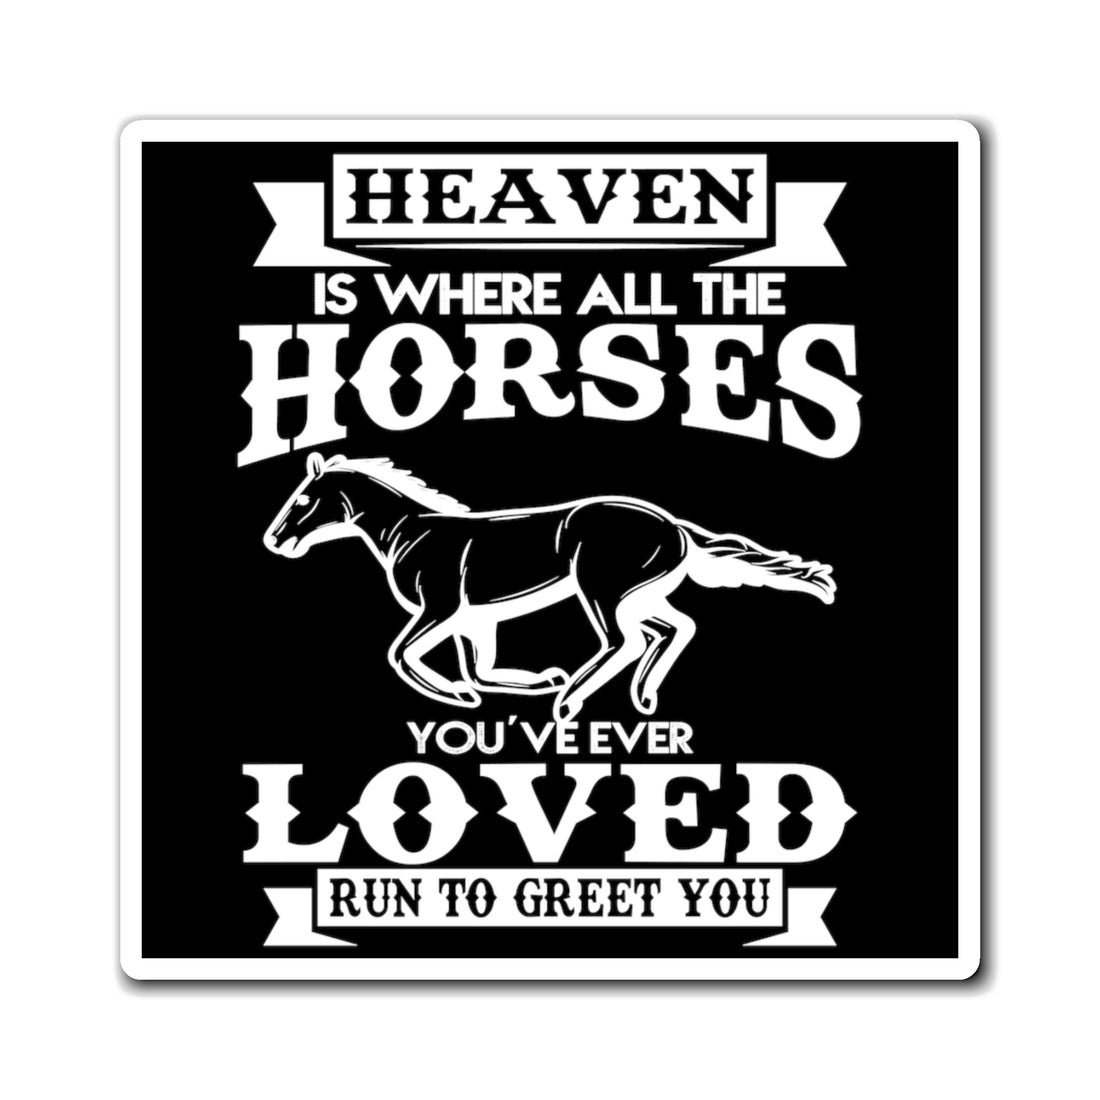 Heaven Is Where All The Horses You Have Ever Loved Join To Greet You - Magnet